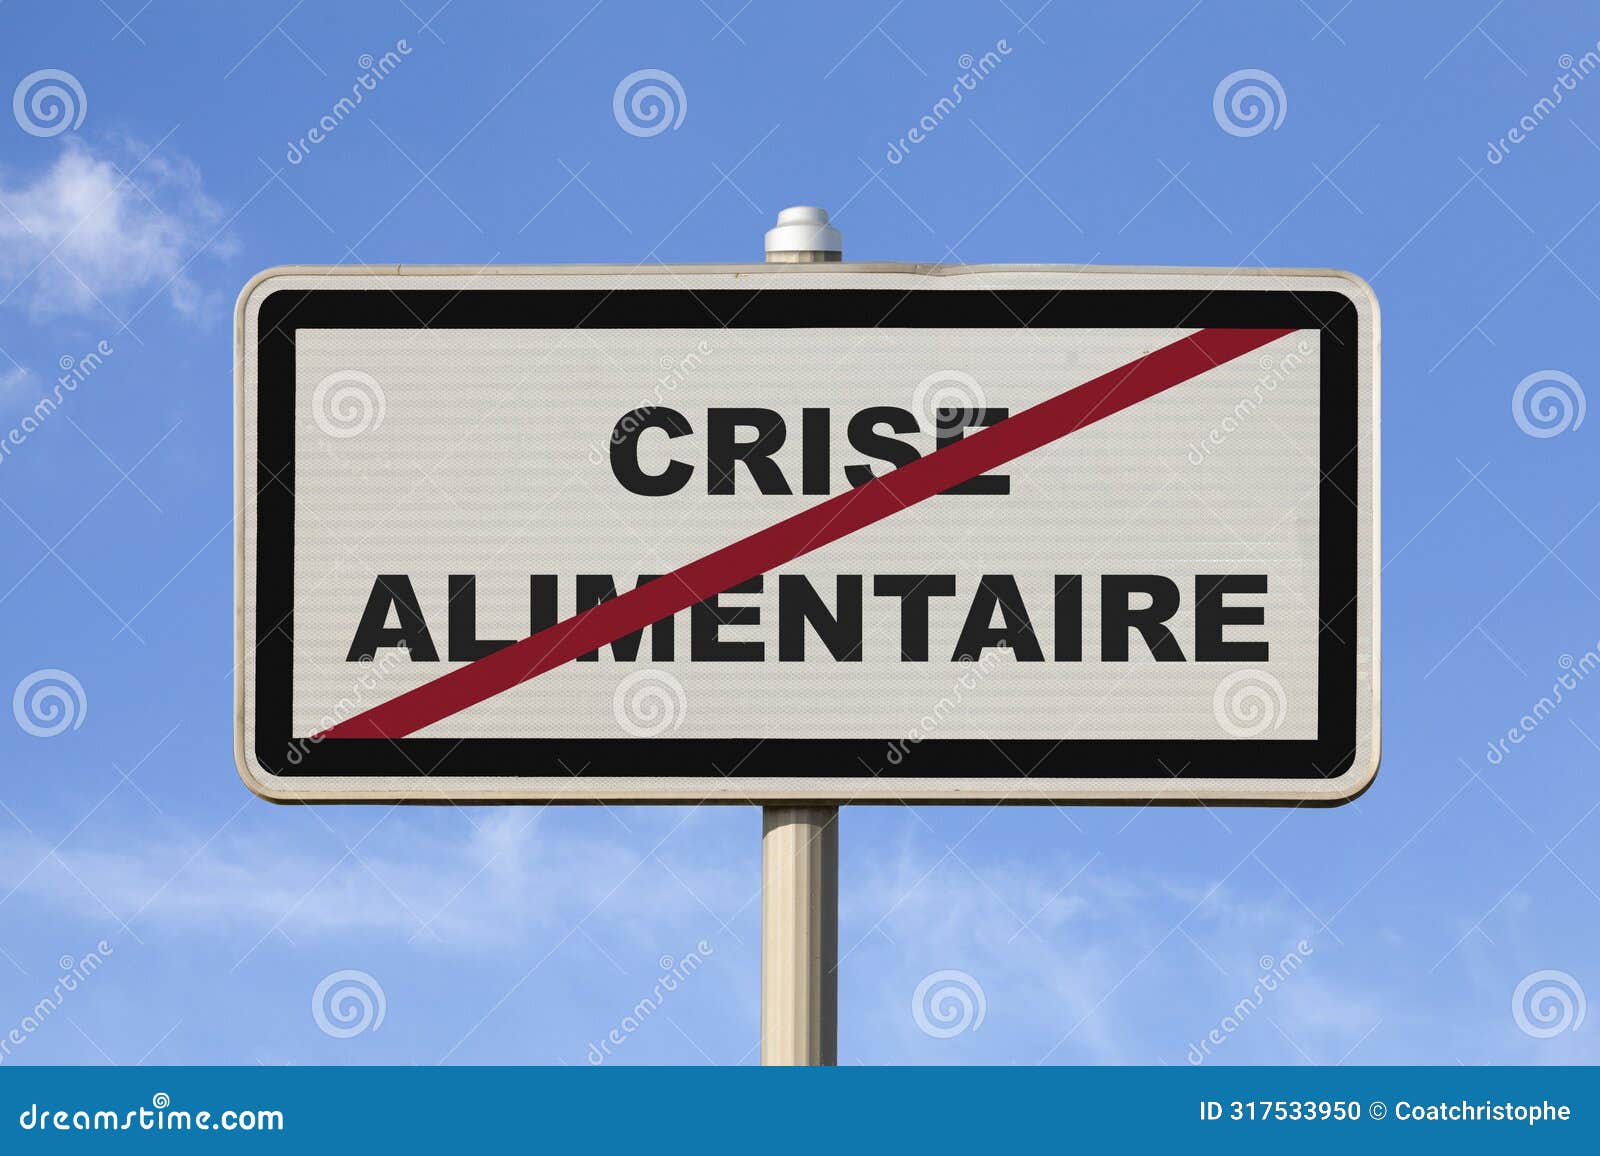 crise alimentaire - french exit city sign